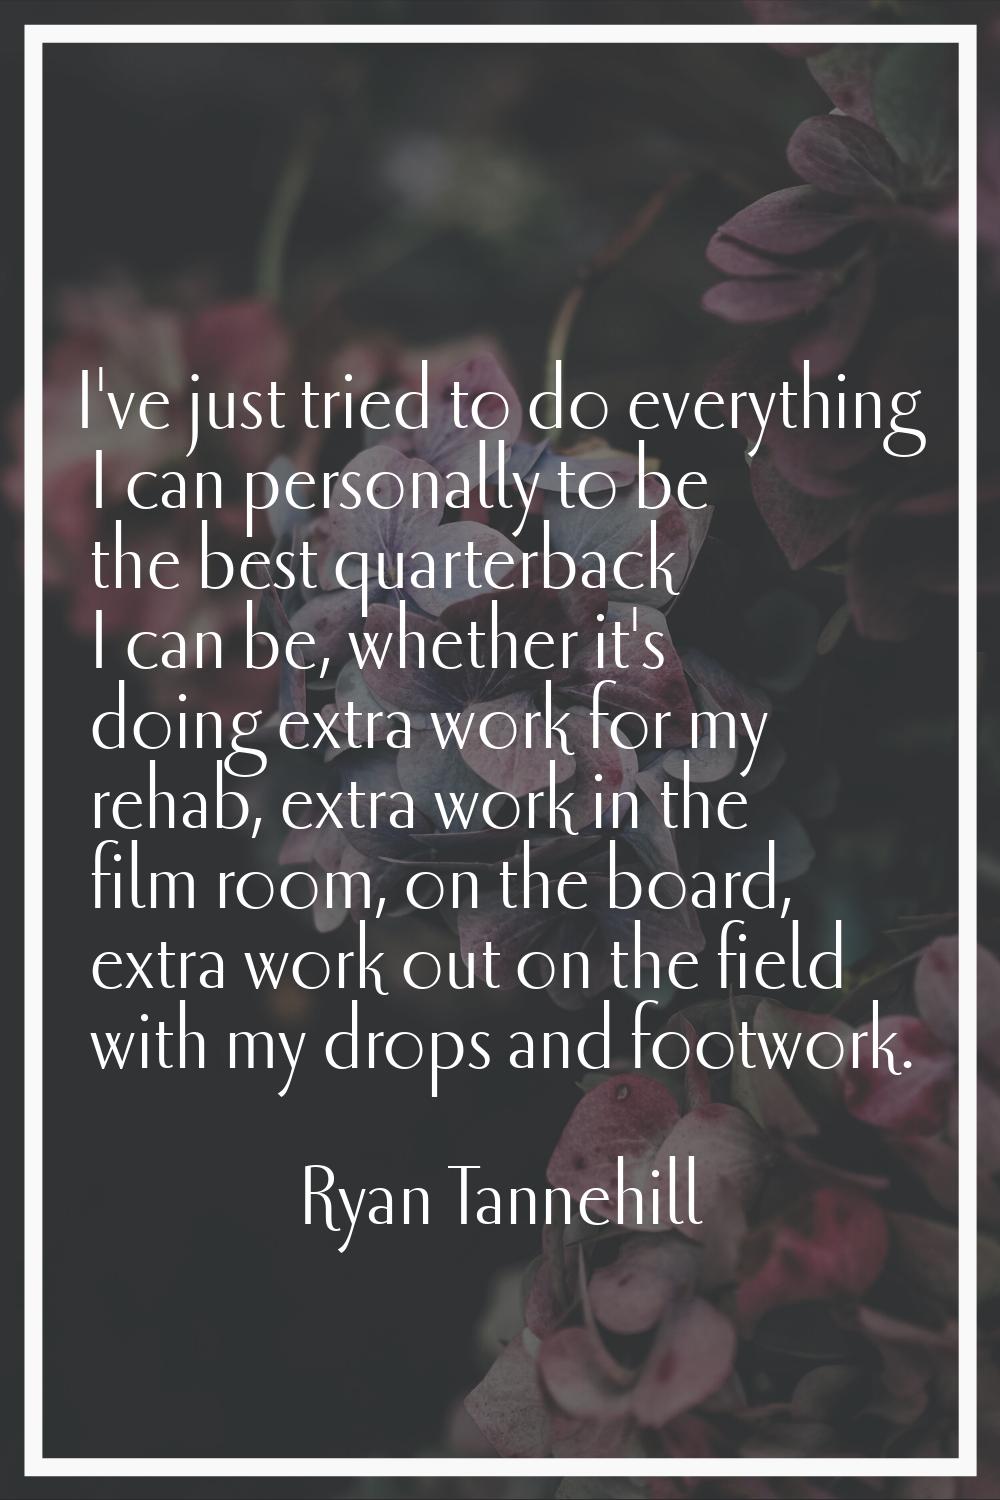 I've just tried to do everything I can personally to be the best quarterback I can be, whether it's